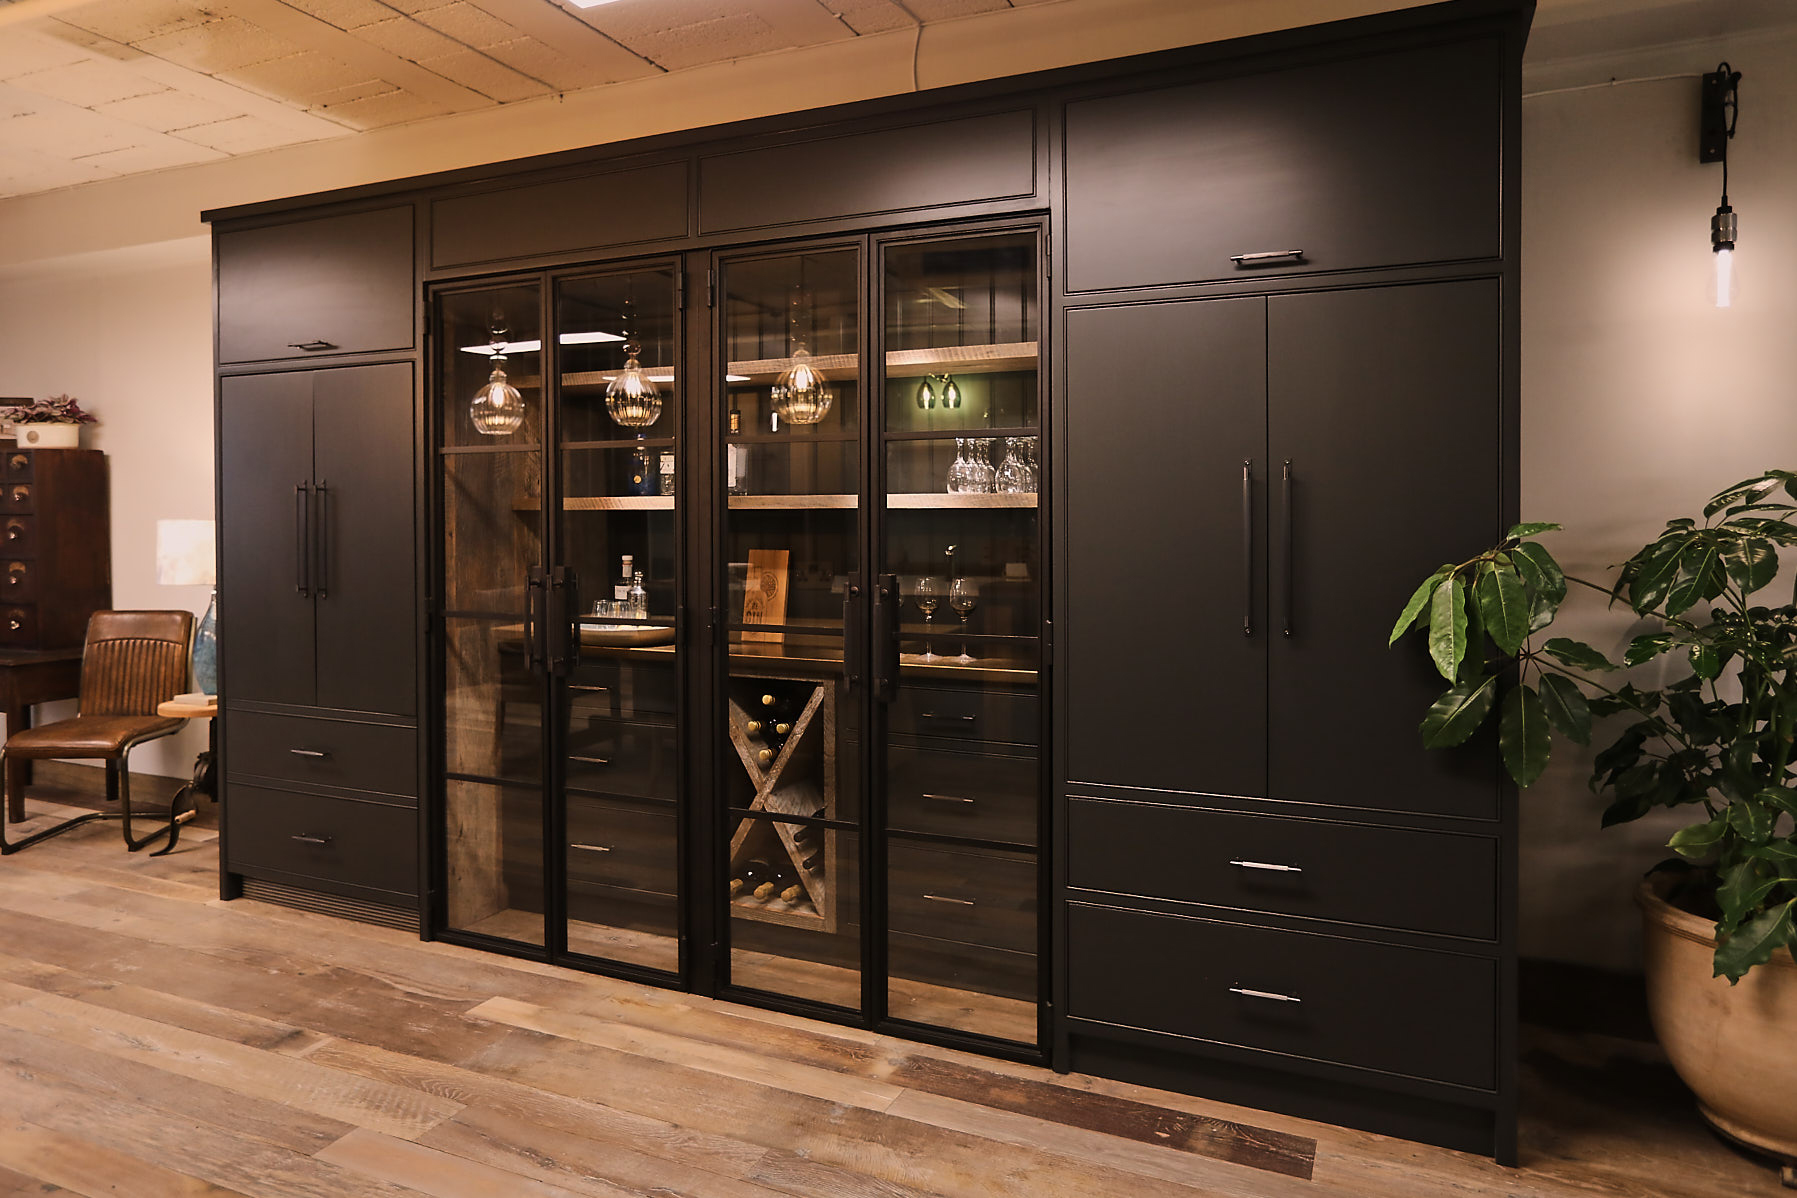 Tall kitchen cabinets painted in lamp black with crittall style doors